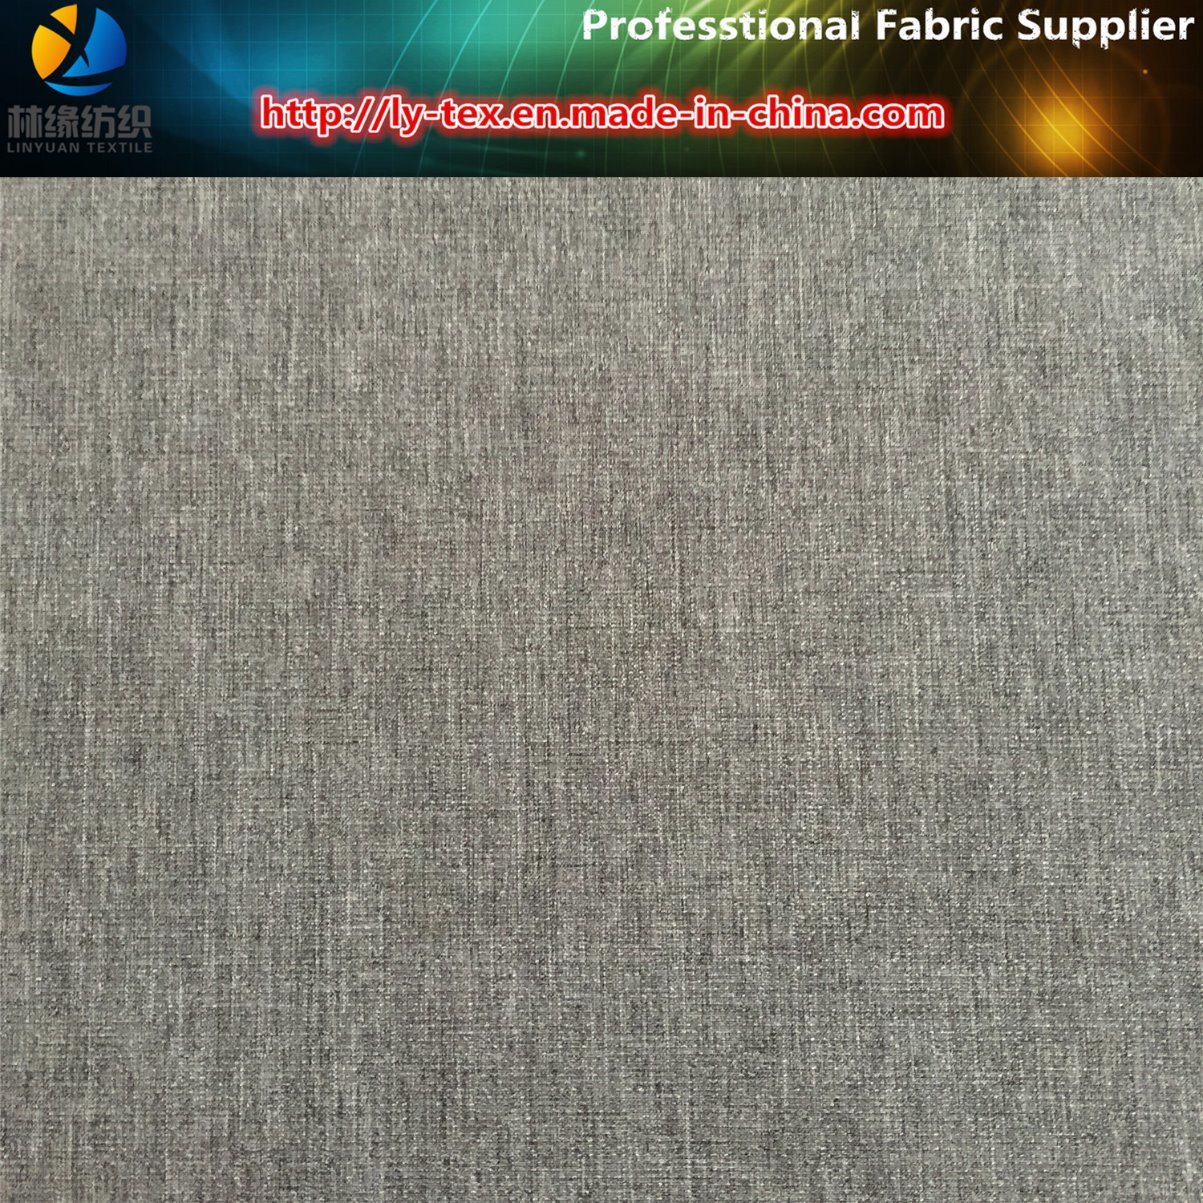 Polyester Sydney Spinning Fabric with Jacquard for Garment (R00076)